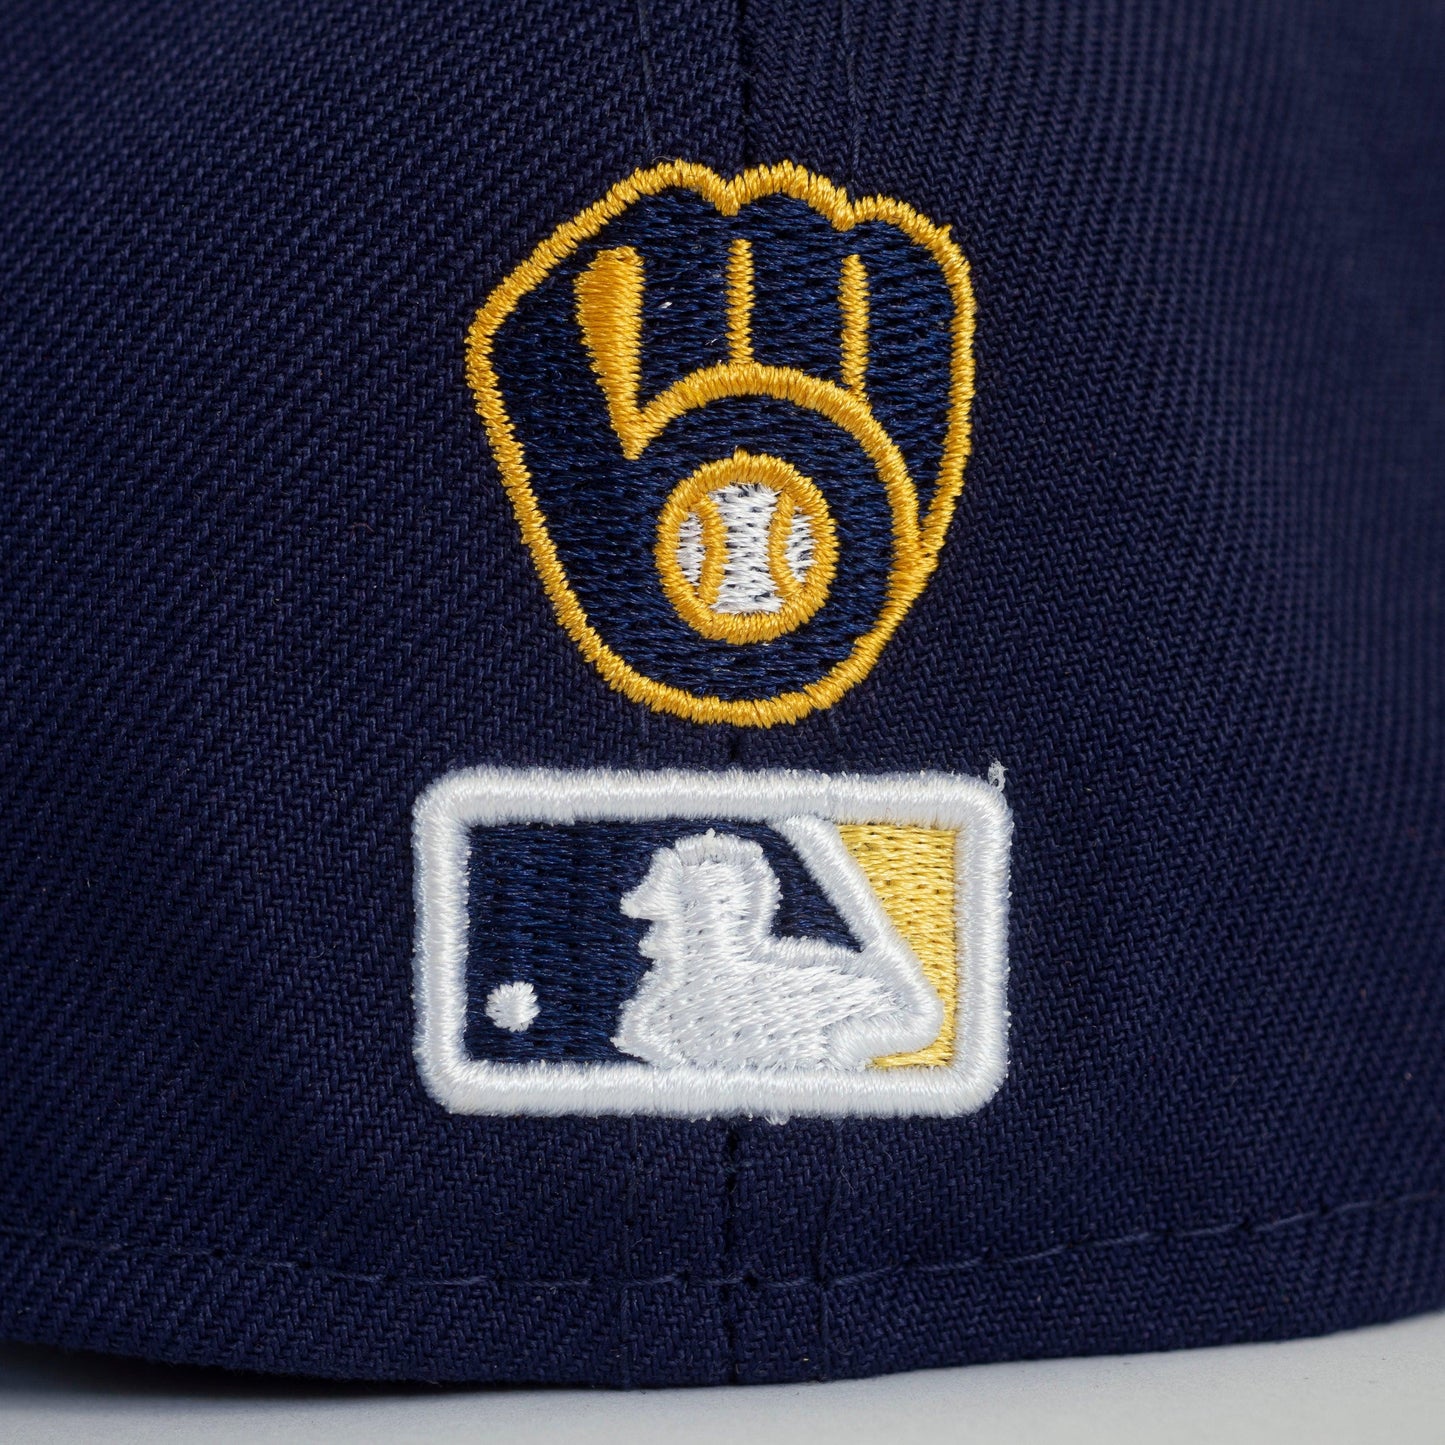 NEW ERA 59FIFTY MLB MILWAUKEE BREWERS SIDE PATCH BLOOM NAVY / SOFT YELLOW UV FITTED CAP